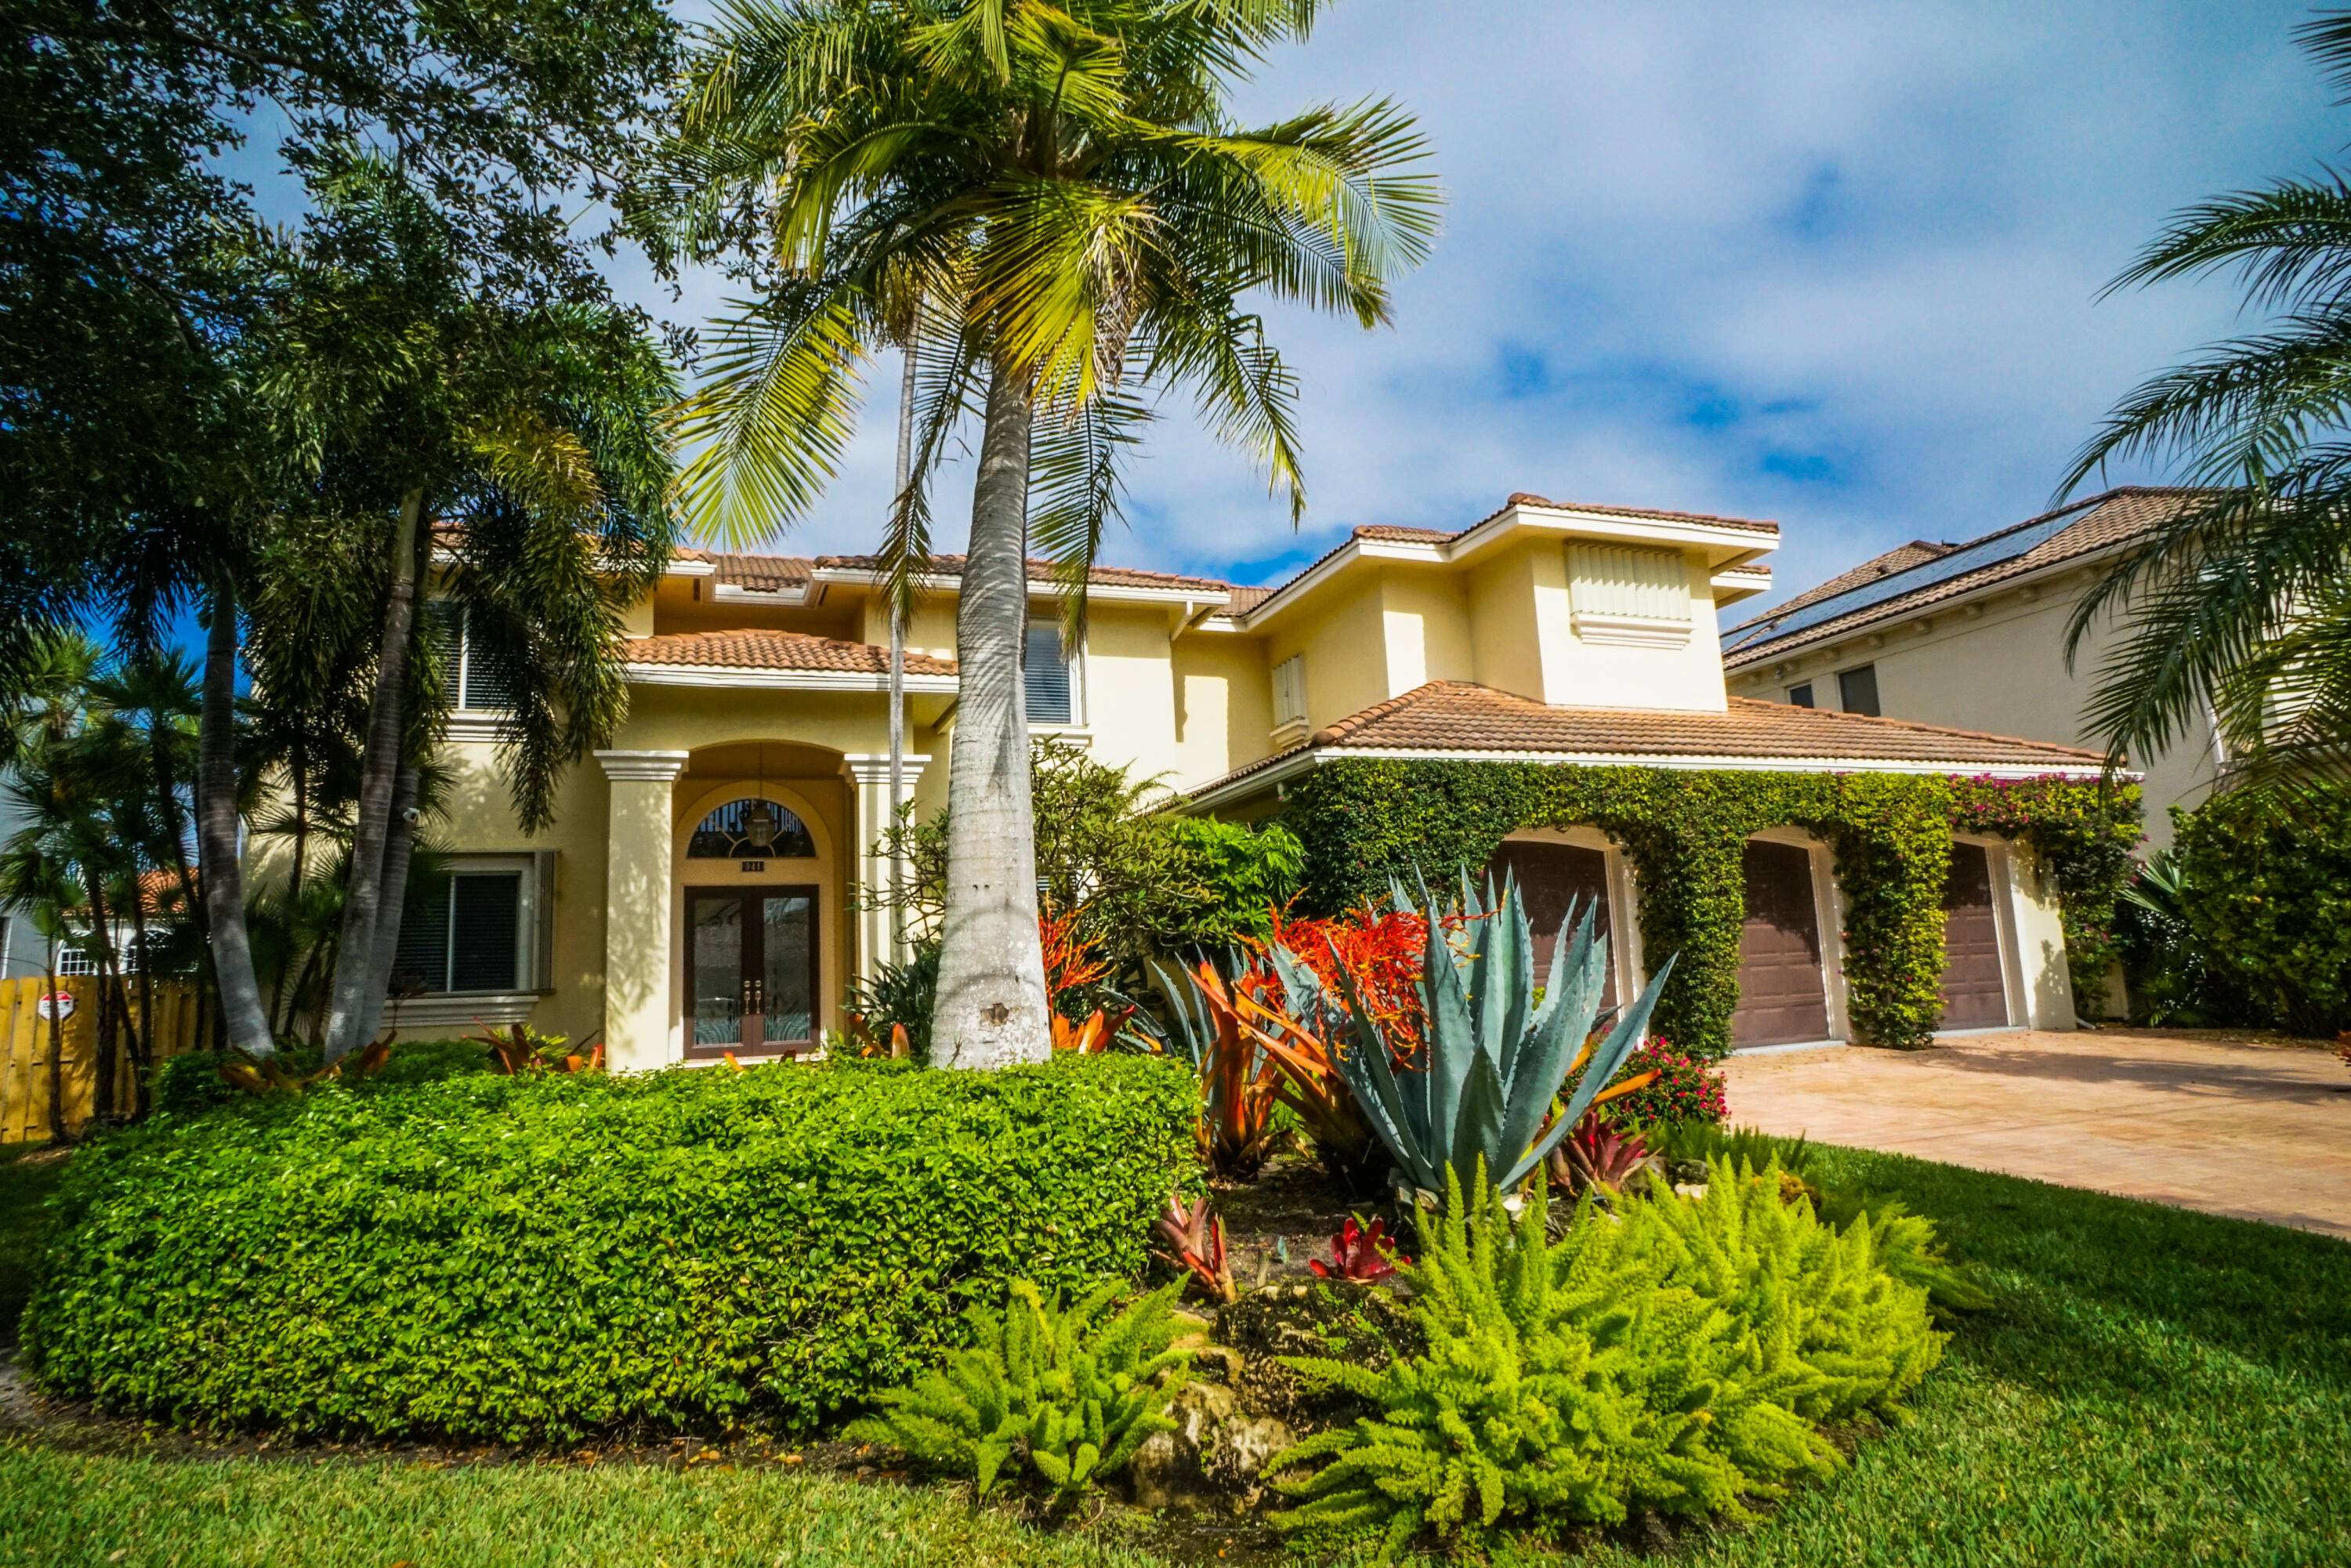 Step into this stunning 4 bedroom, 4 bath home with a 3 car garage offered as a furnished annual rental in Tropic Isle, the exclusive waterfront community in Delray Beach.